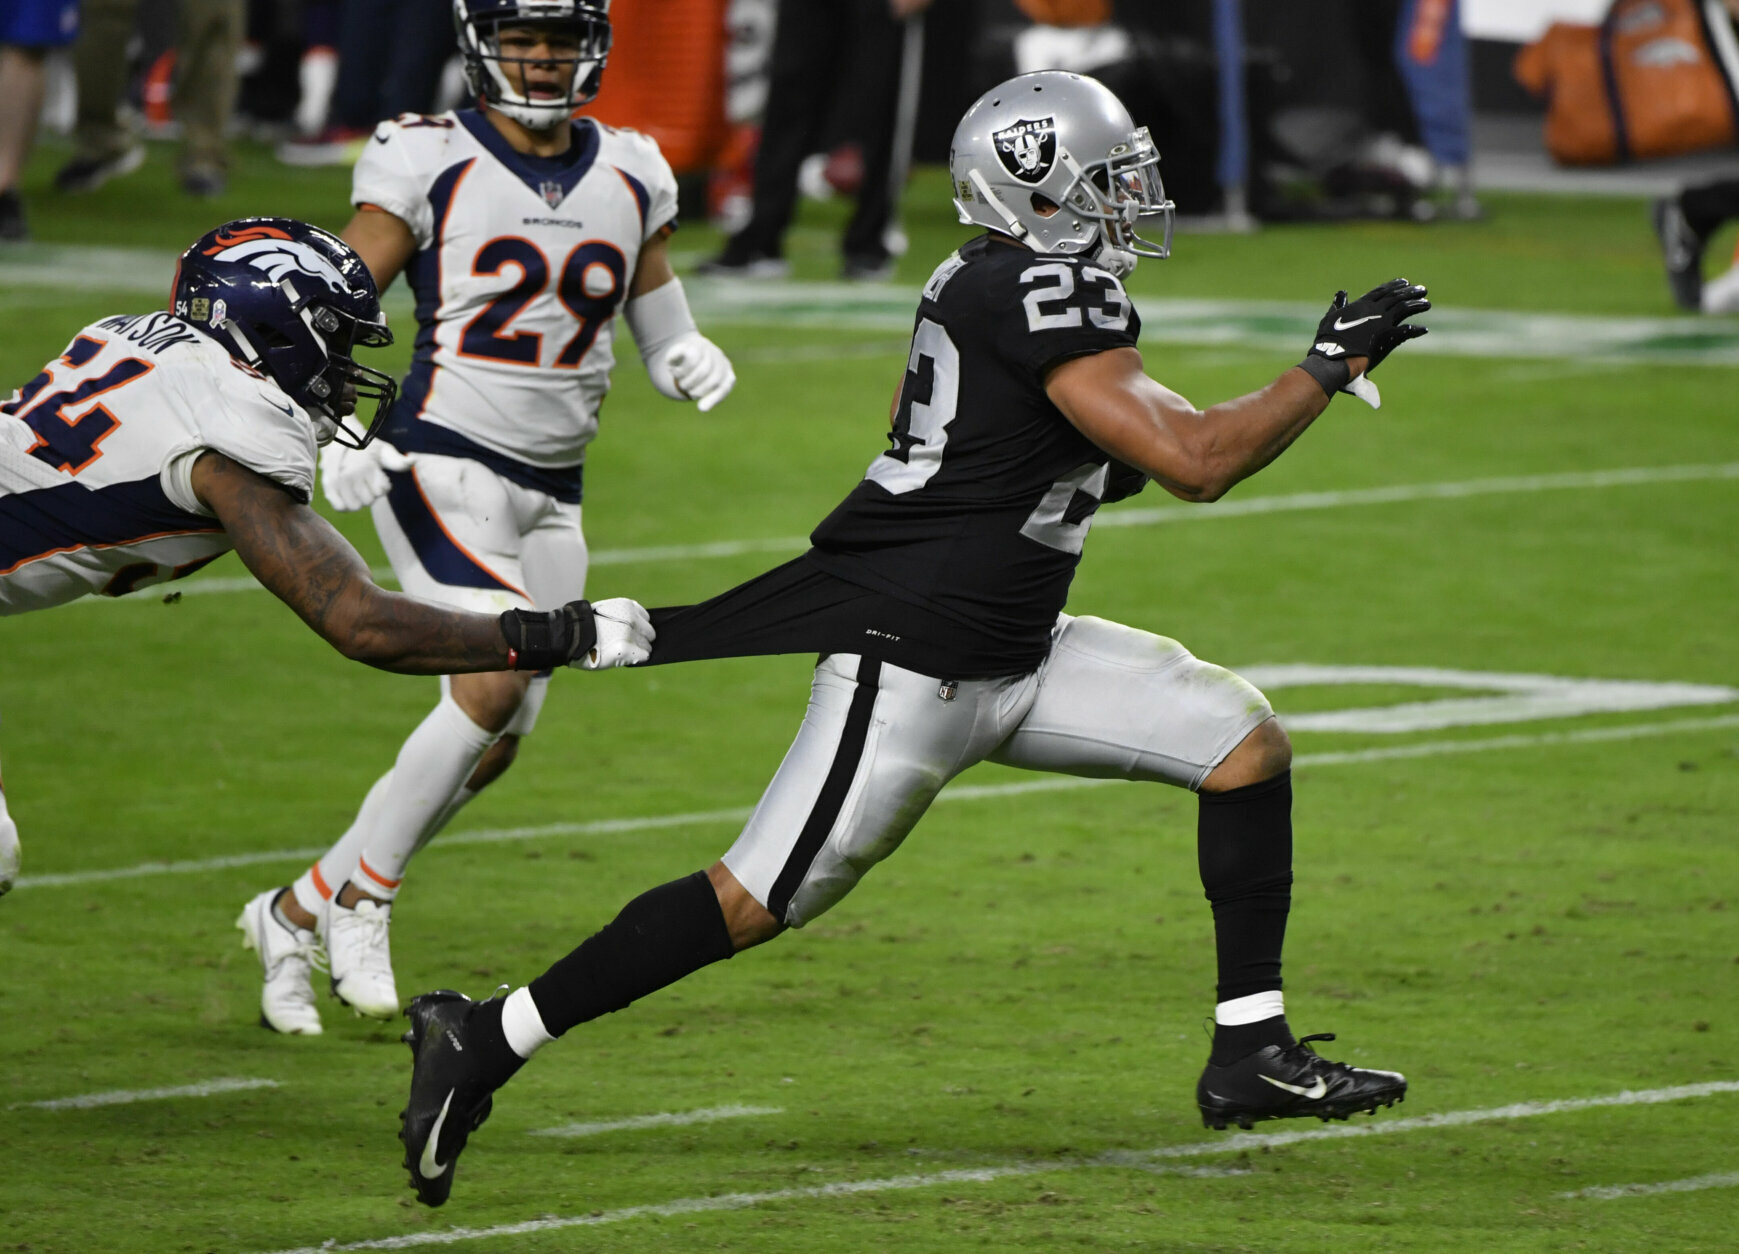 <p><b><i>Broncos 12</i></b><br />
<b><i>Raiders 37</i></b></p>
<p>Las Vegas used a dominant run game and four Drew Lock interceptions to win its third straight game and move to 6-3 in <a href="https://twitter.com/ESPNStatsInfo/status/1328163380331388934?s=20">a wide open conference</a>. If the Raiders beat the Chiefs in primetime to sweep the defending champs, the stretch run sets up nicely for the Silver and Black to stun the league and win the AFC West.</p>
